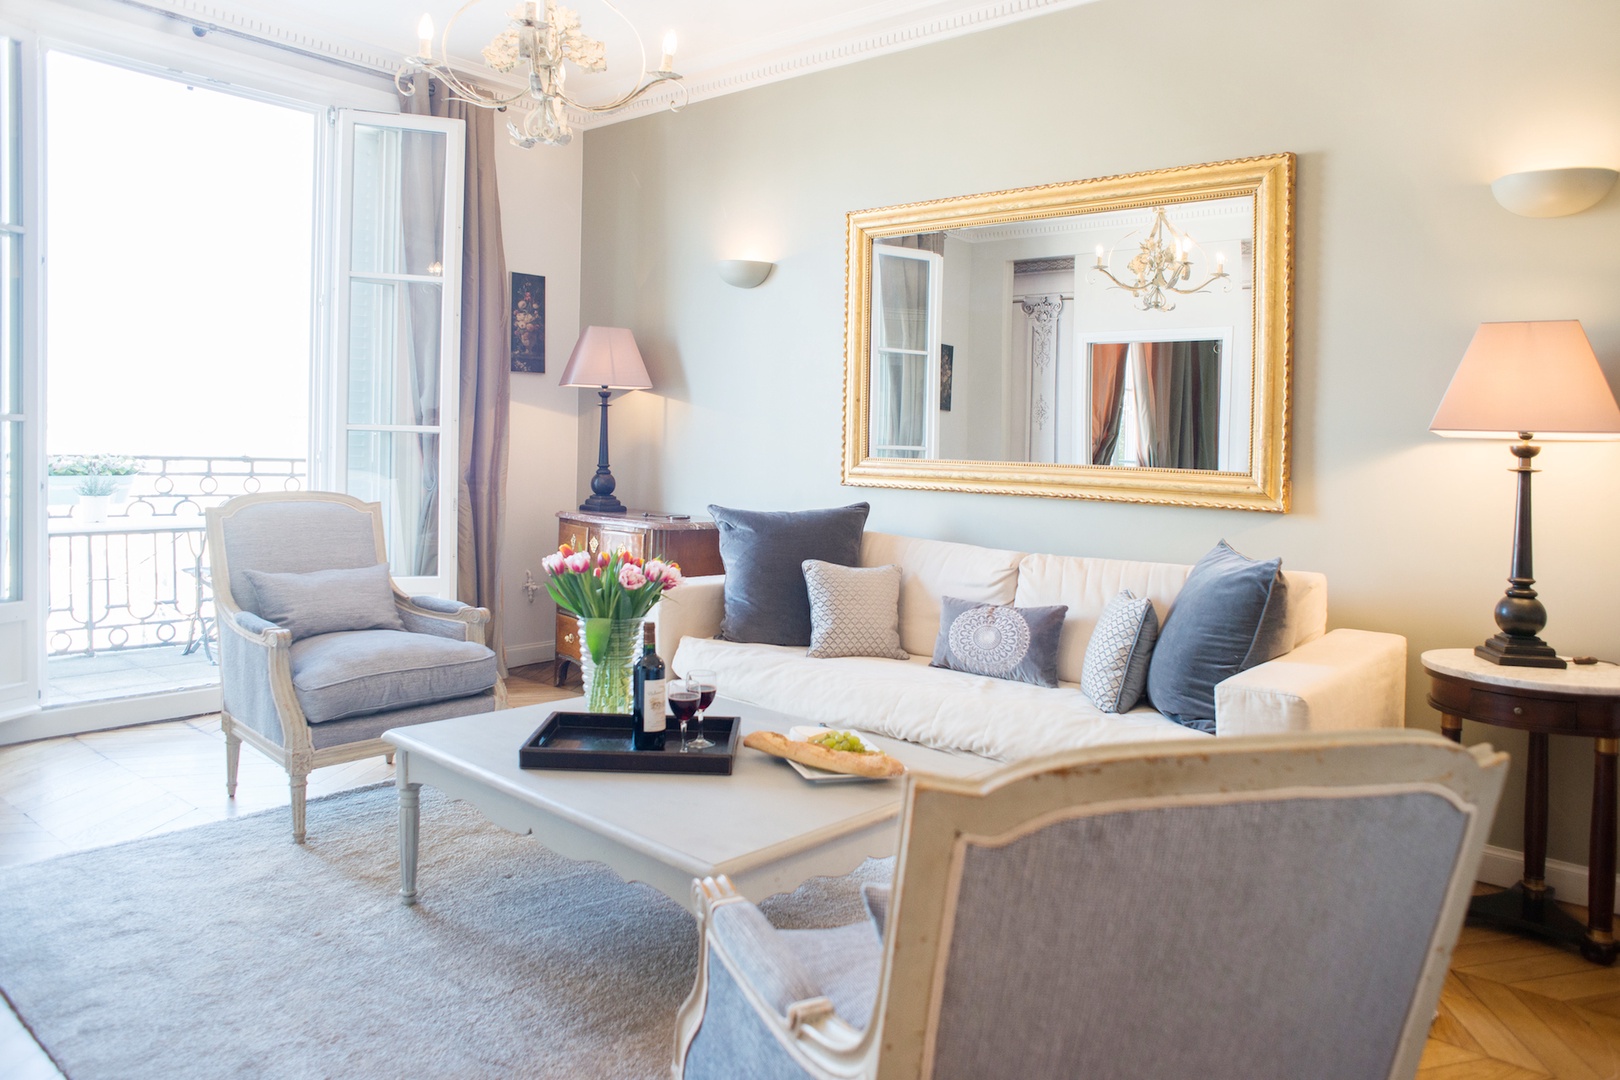 Enjoy your Paris stay in style in the comfortable living room.